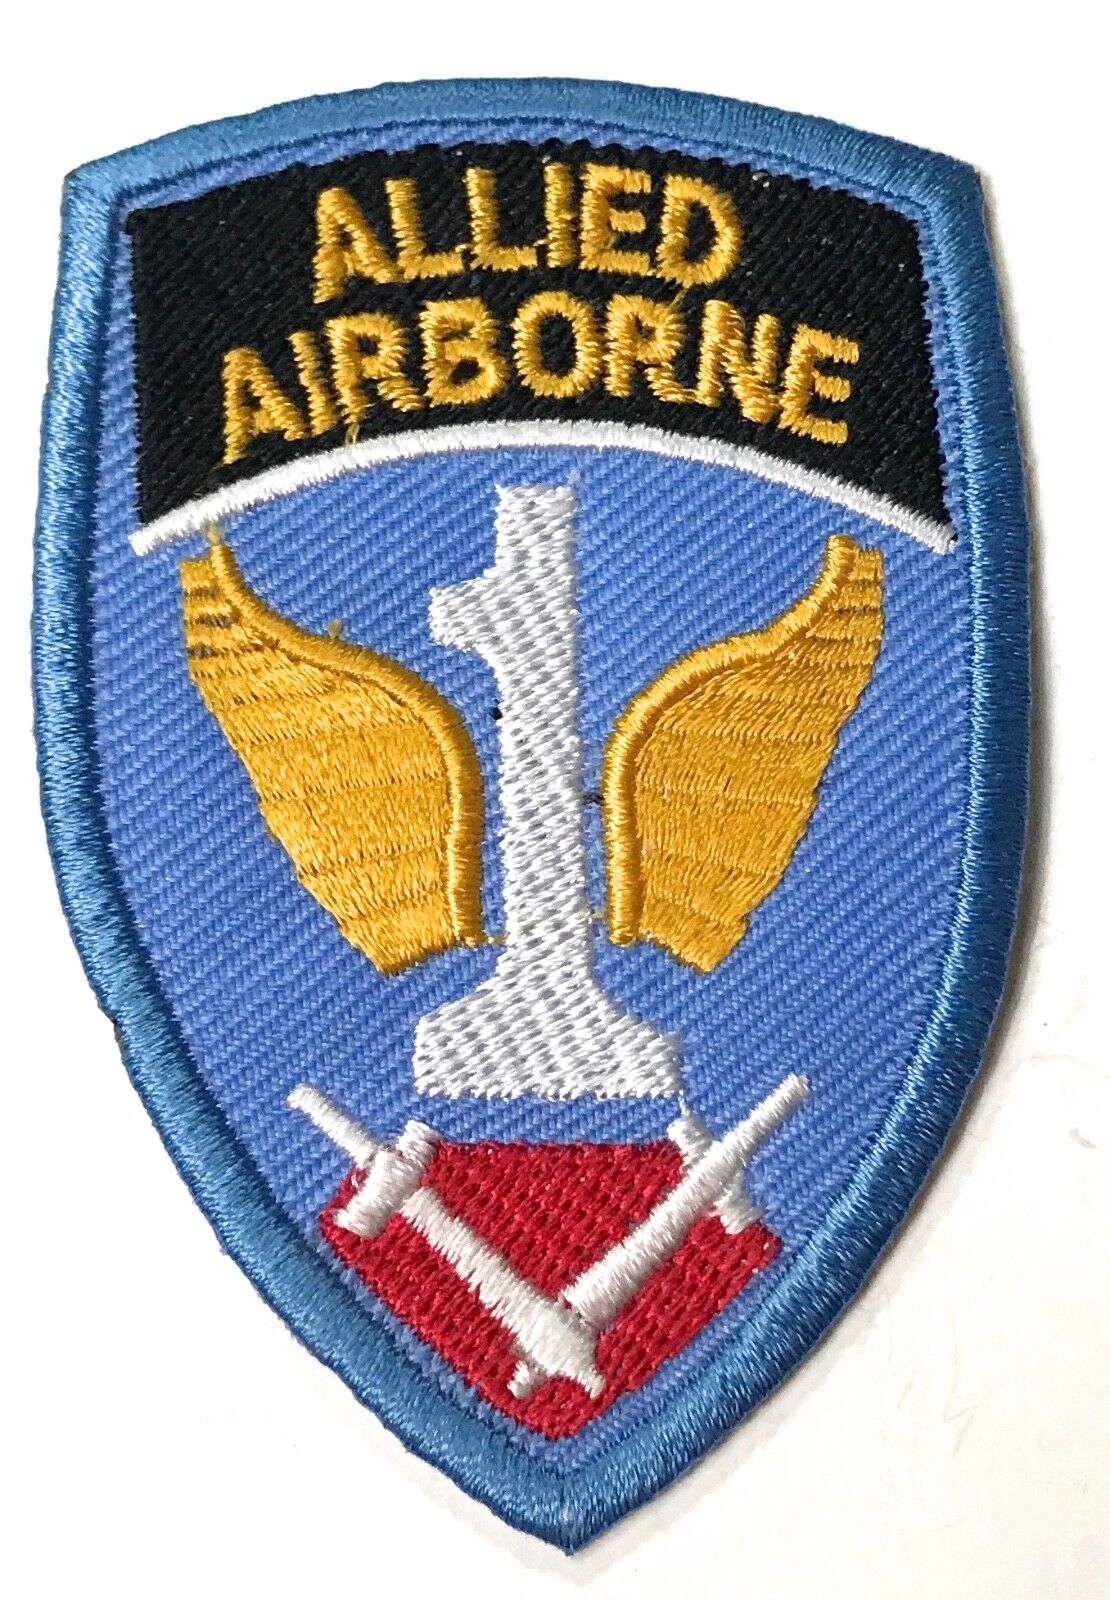  WWII US AIRBORNE PARATROOPER 1ST ALLIED JUMP JACKET SLEEVE INSIGNIA PATCH